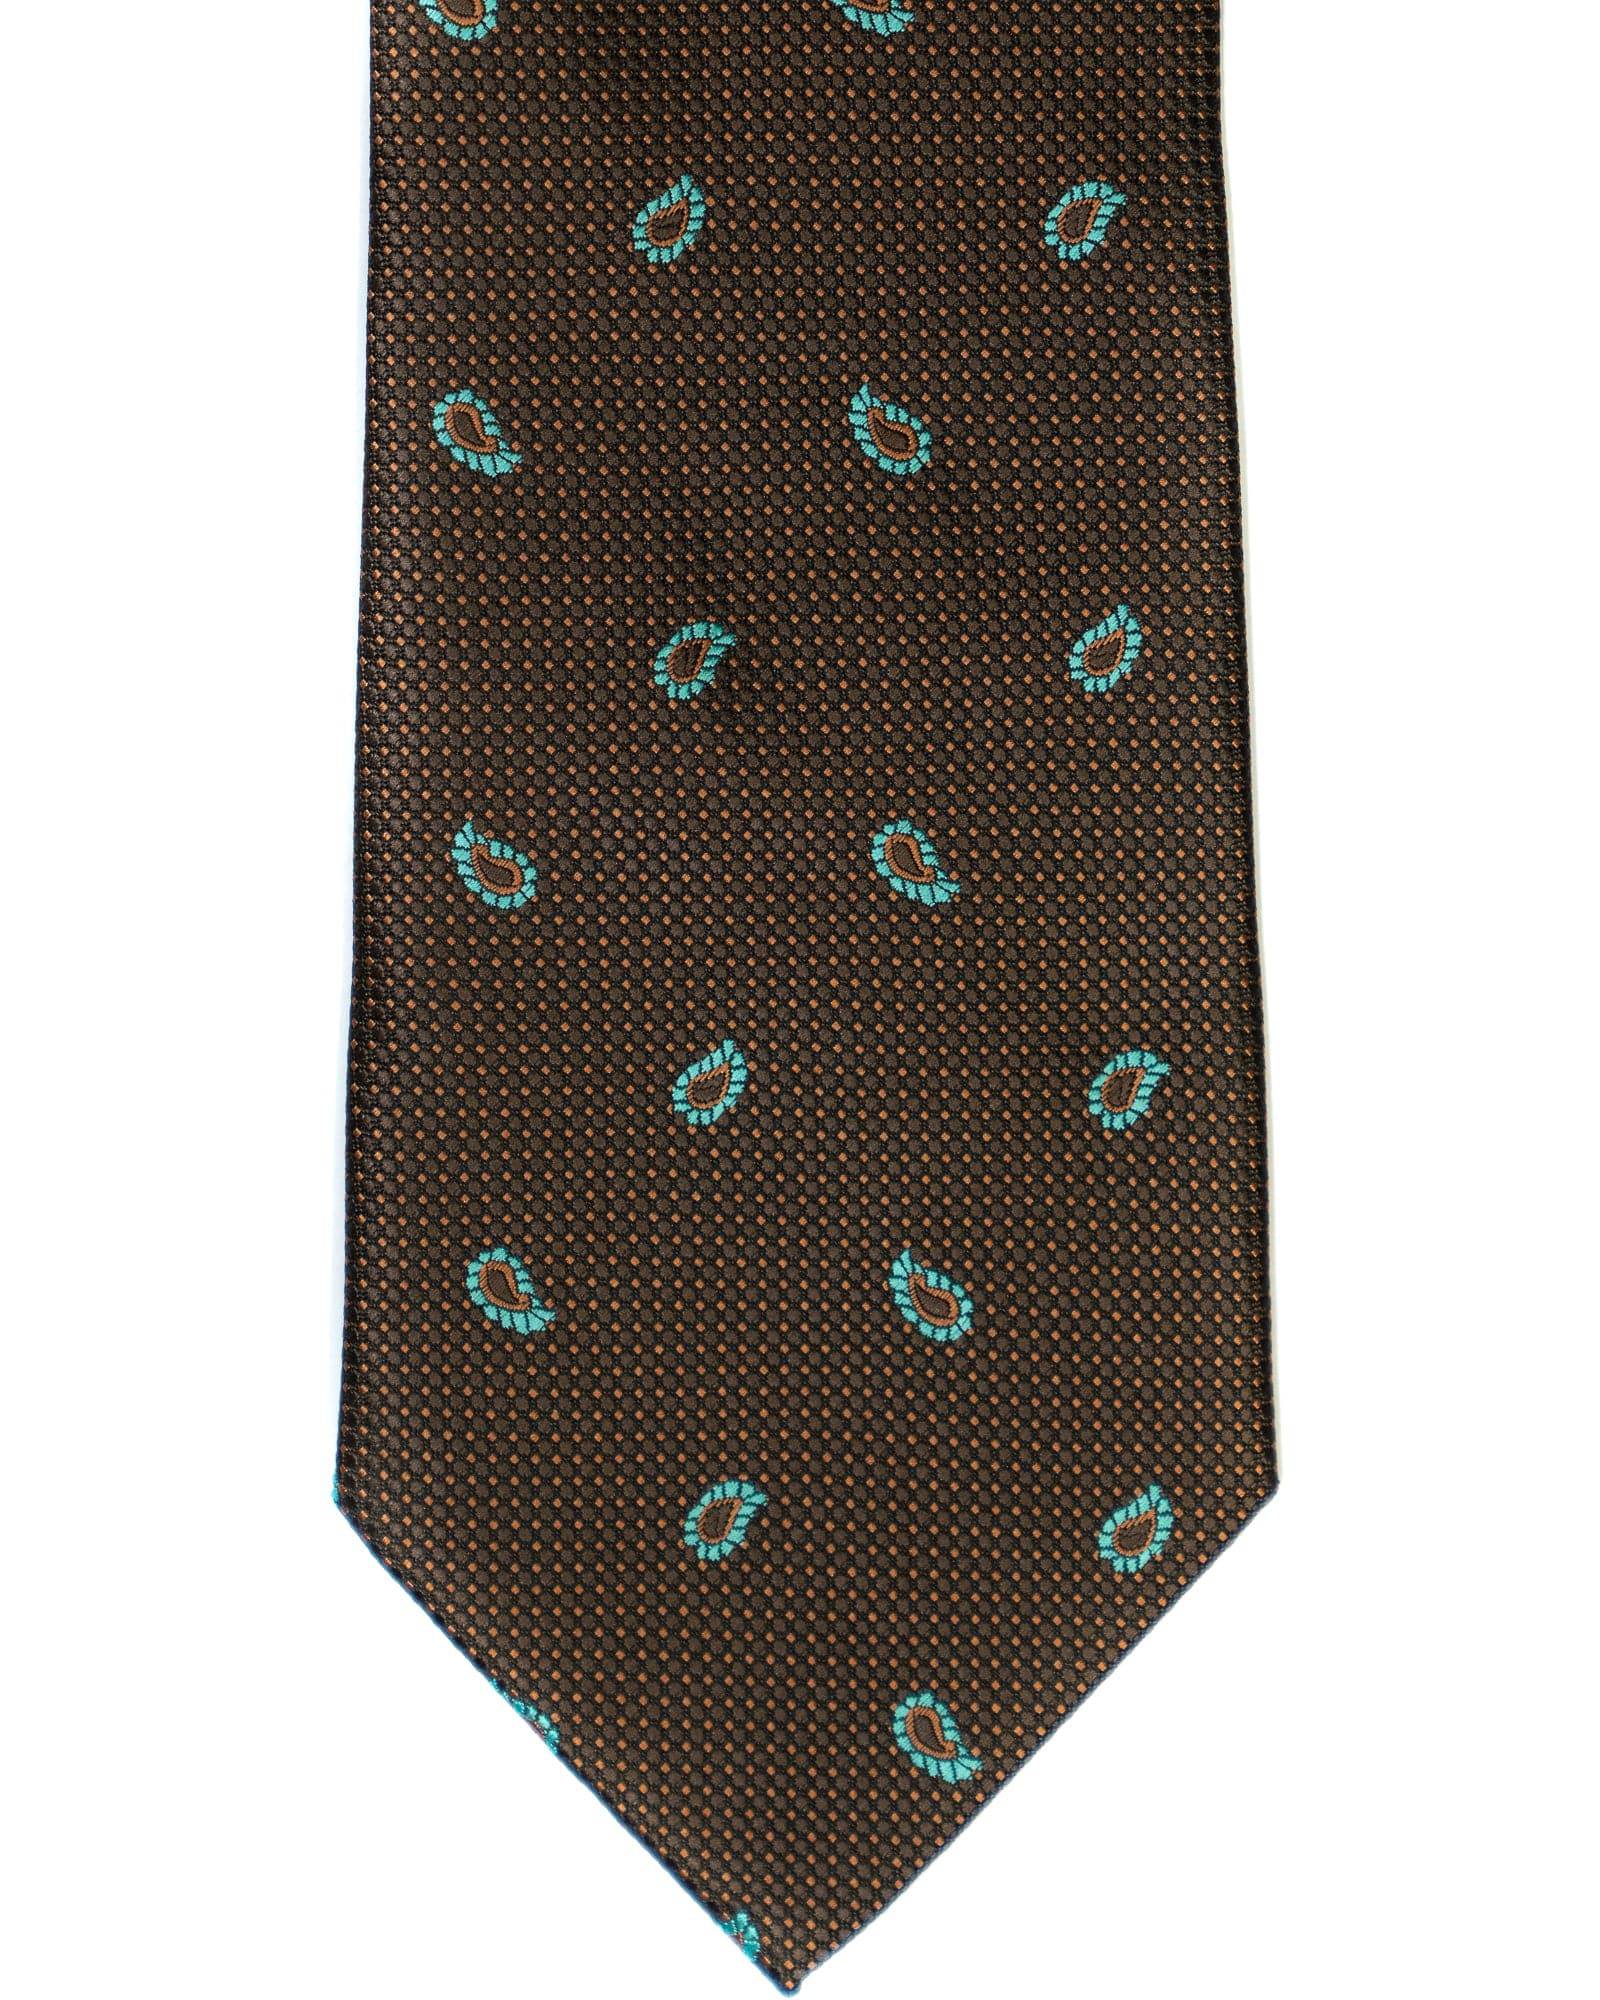 Gianfranco Foulard Tie in Brown with Teal - Rainwater's Men's Clothing and Tuxedo Rental